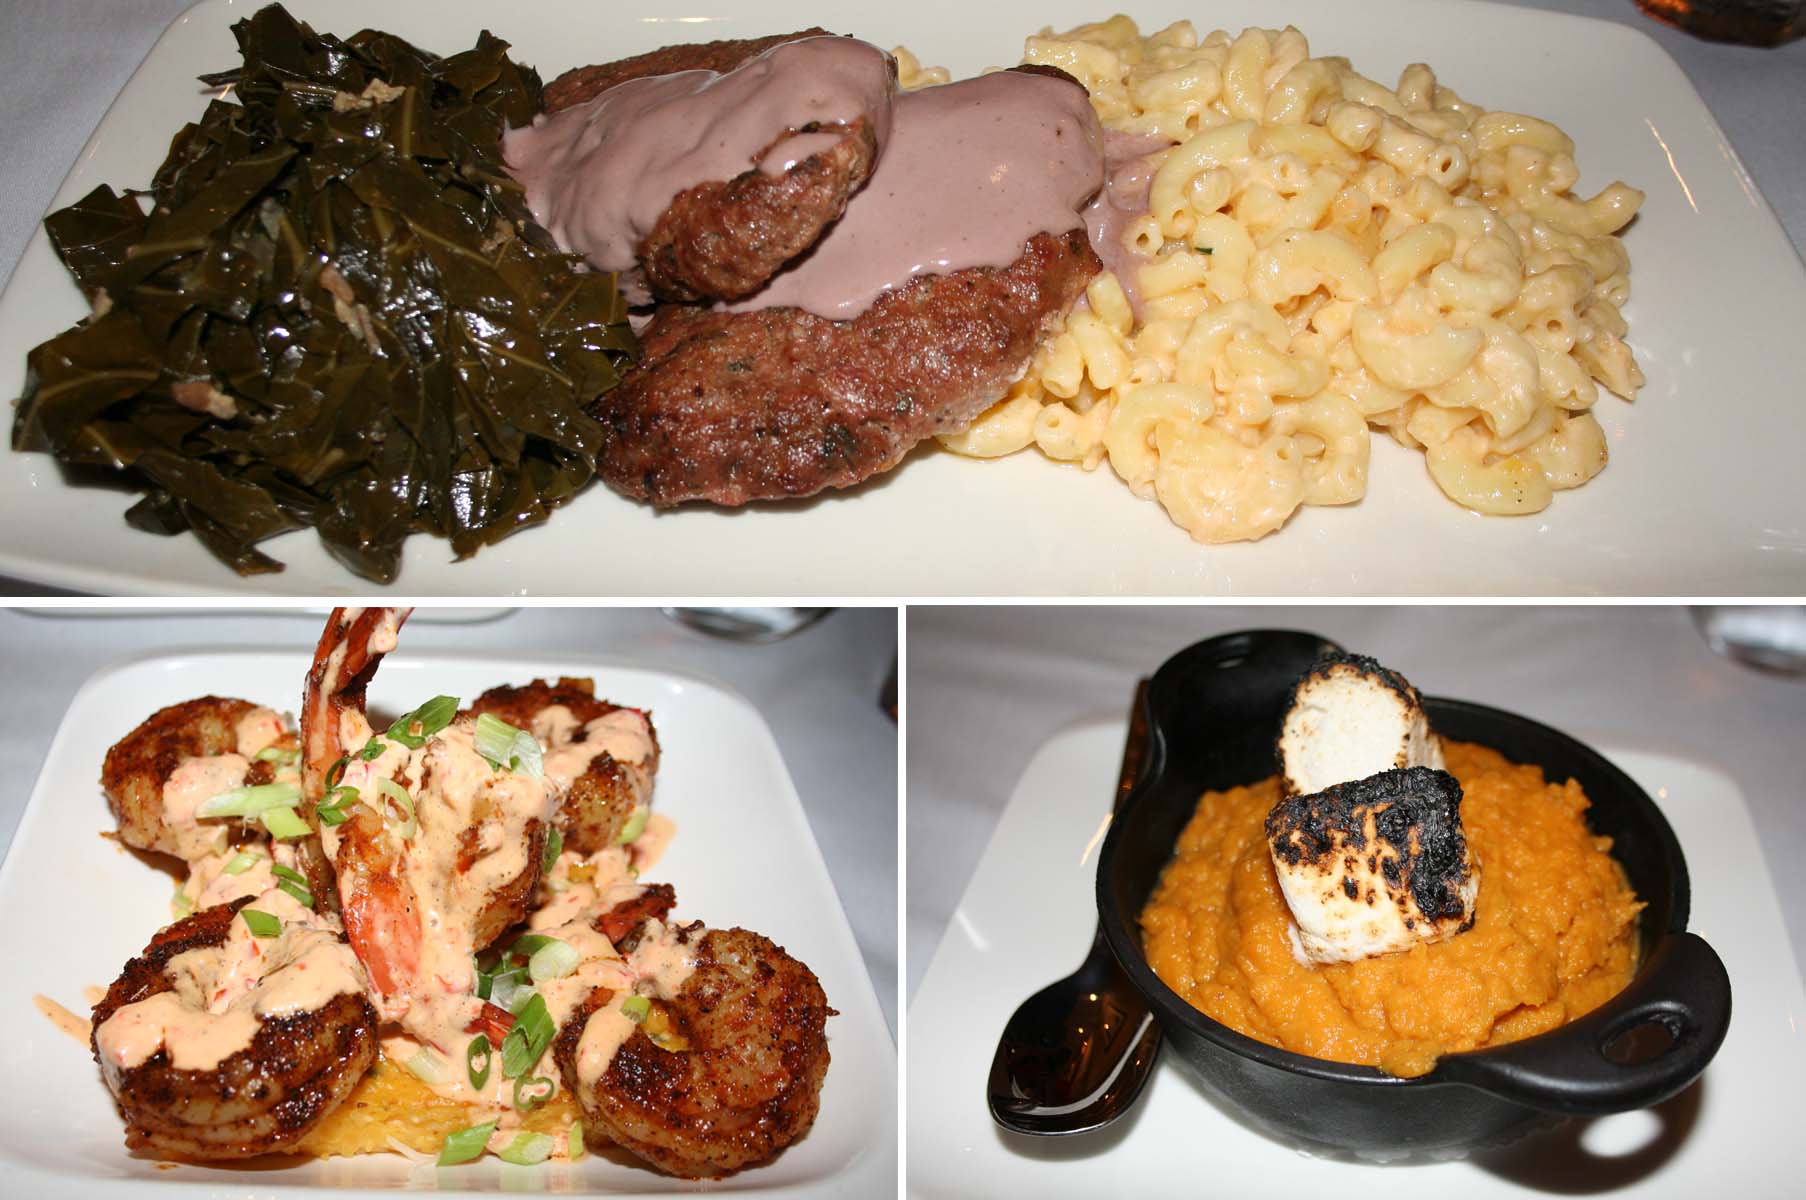 The bison meatloaf with greens and mac and cheese (top) wasn't palatable, but the shrimp and grits (bottom left) and mashed sweet potatoes are sure bets. (Photos: Mark Heckathorn/DC on Heels)